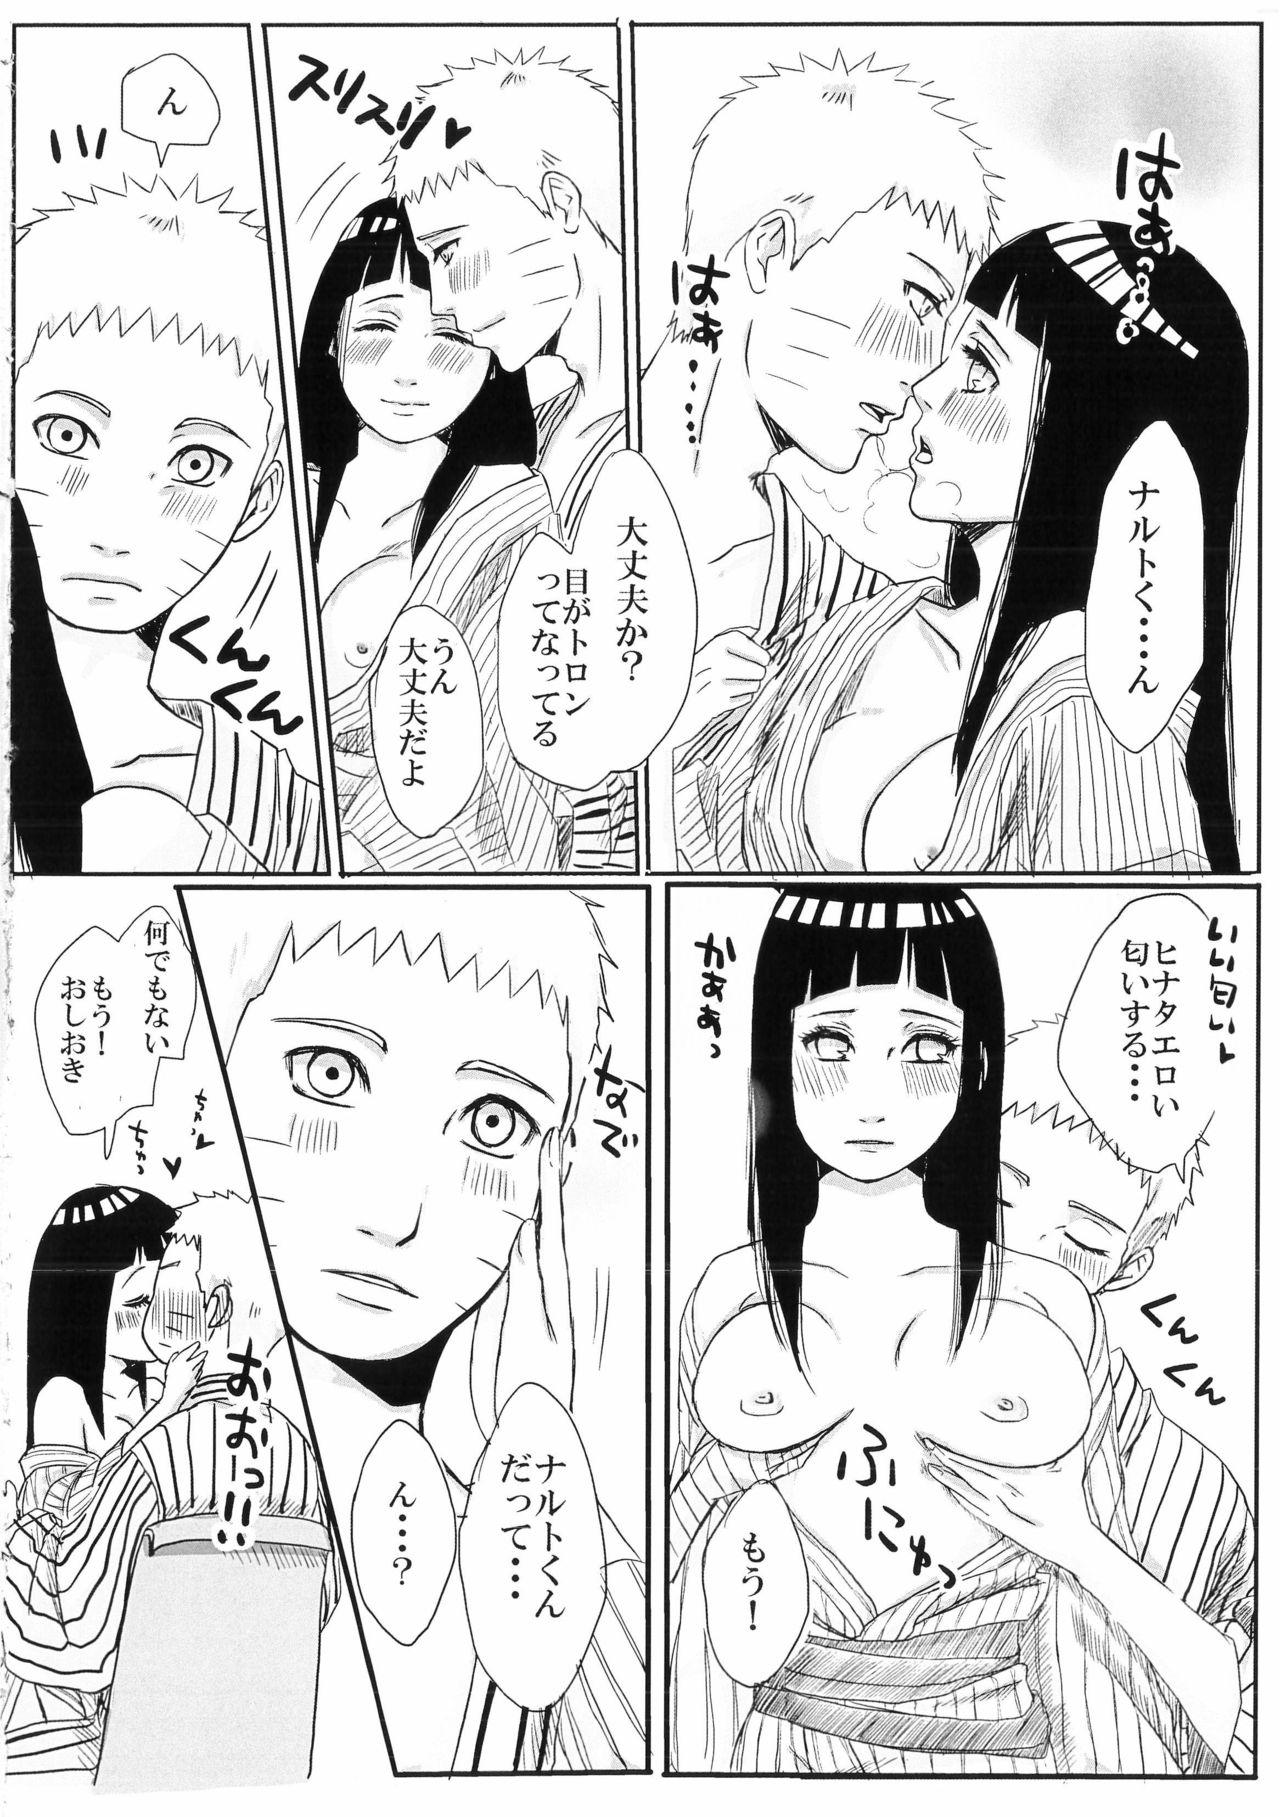 Actress Before the wedding - Naruto Blowjob Contest - Page 6